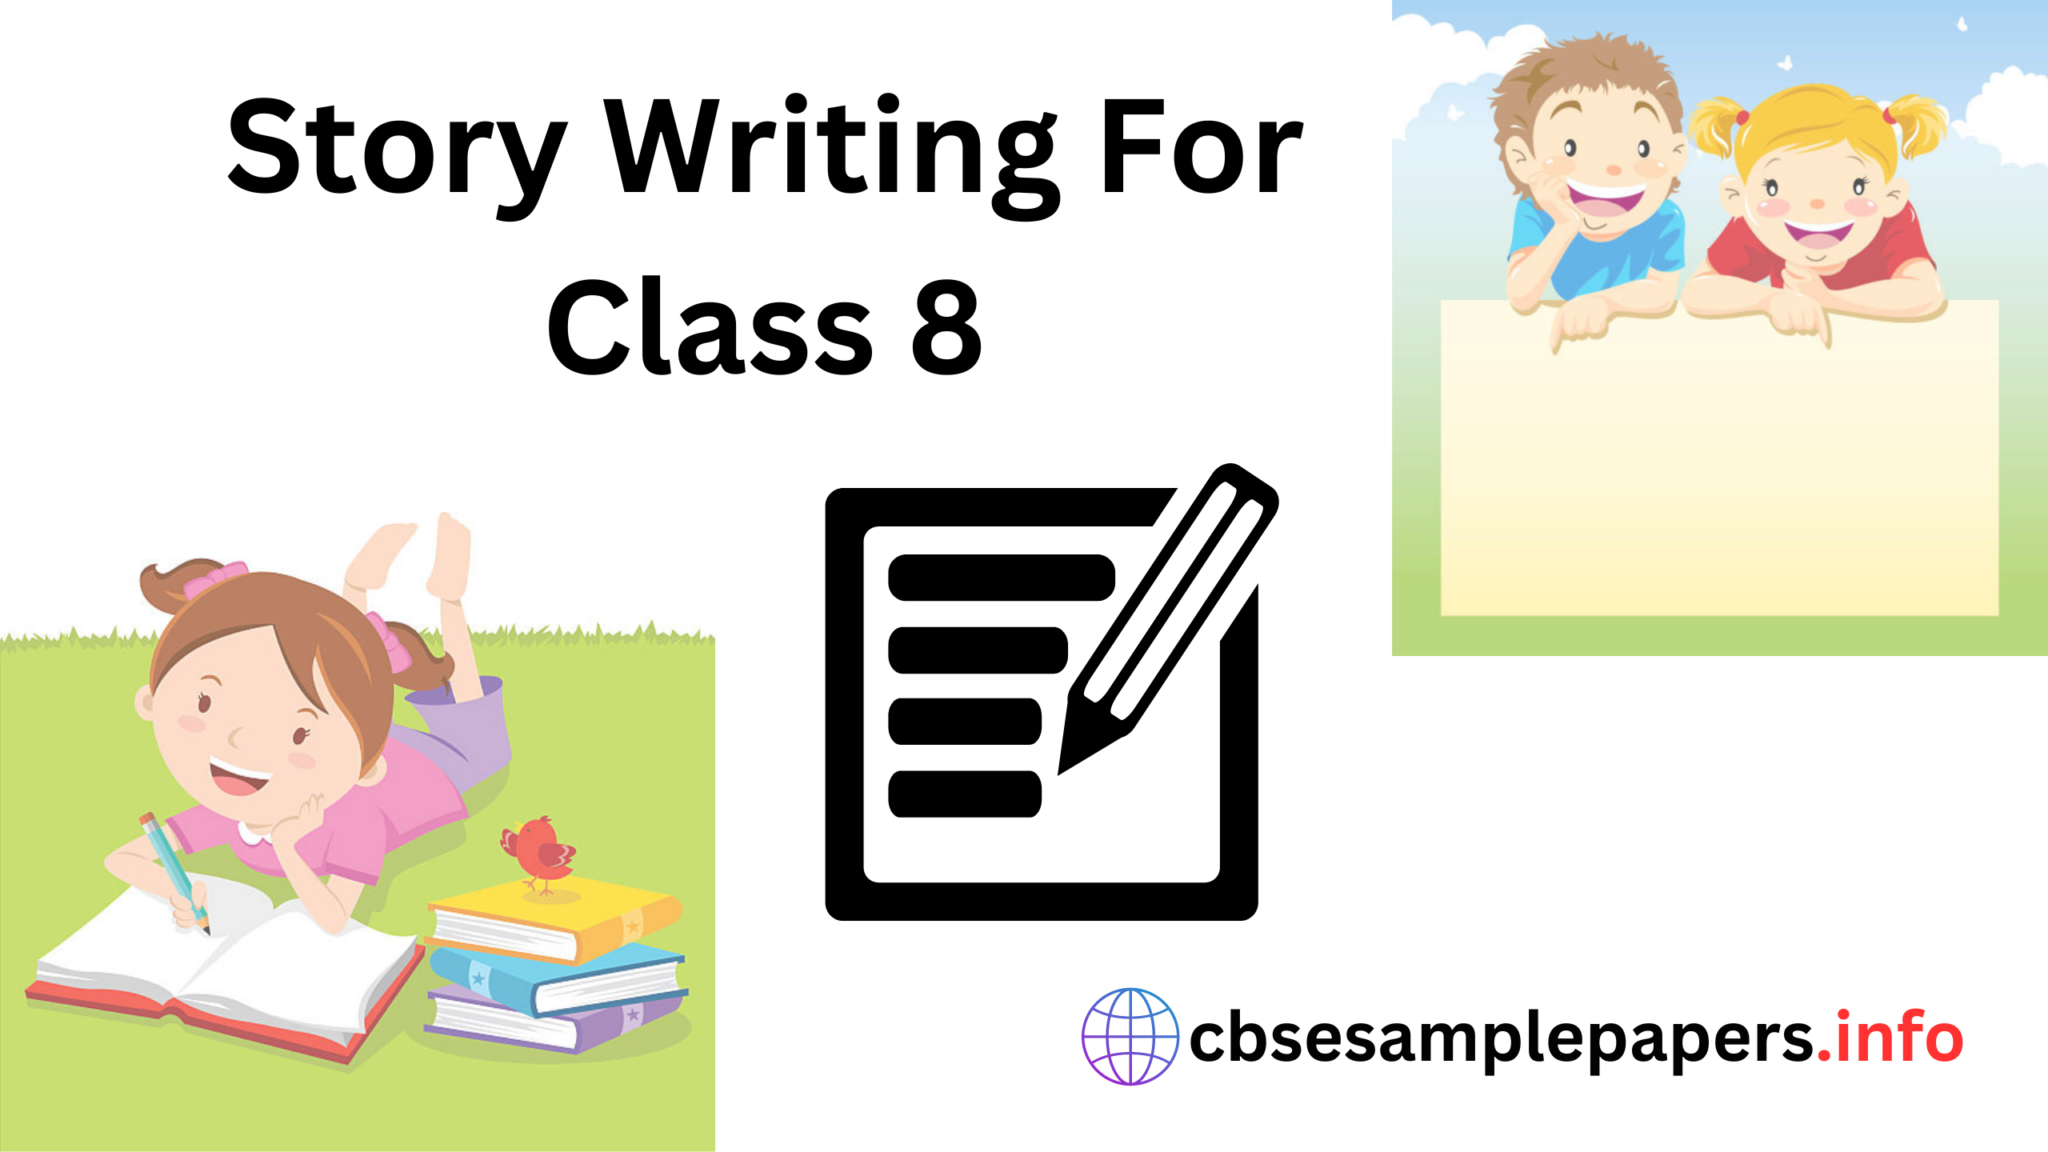 Story Writing For Class 8 Format, Examples, Topics, Exercises - CBSE ...